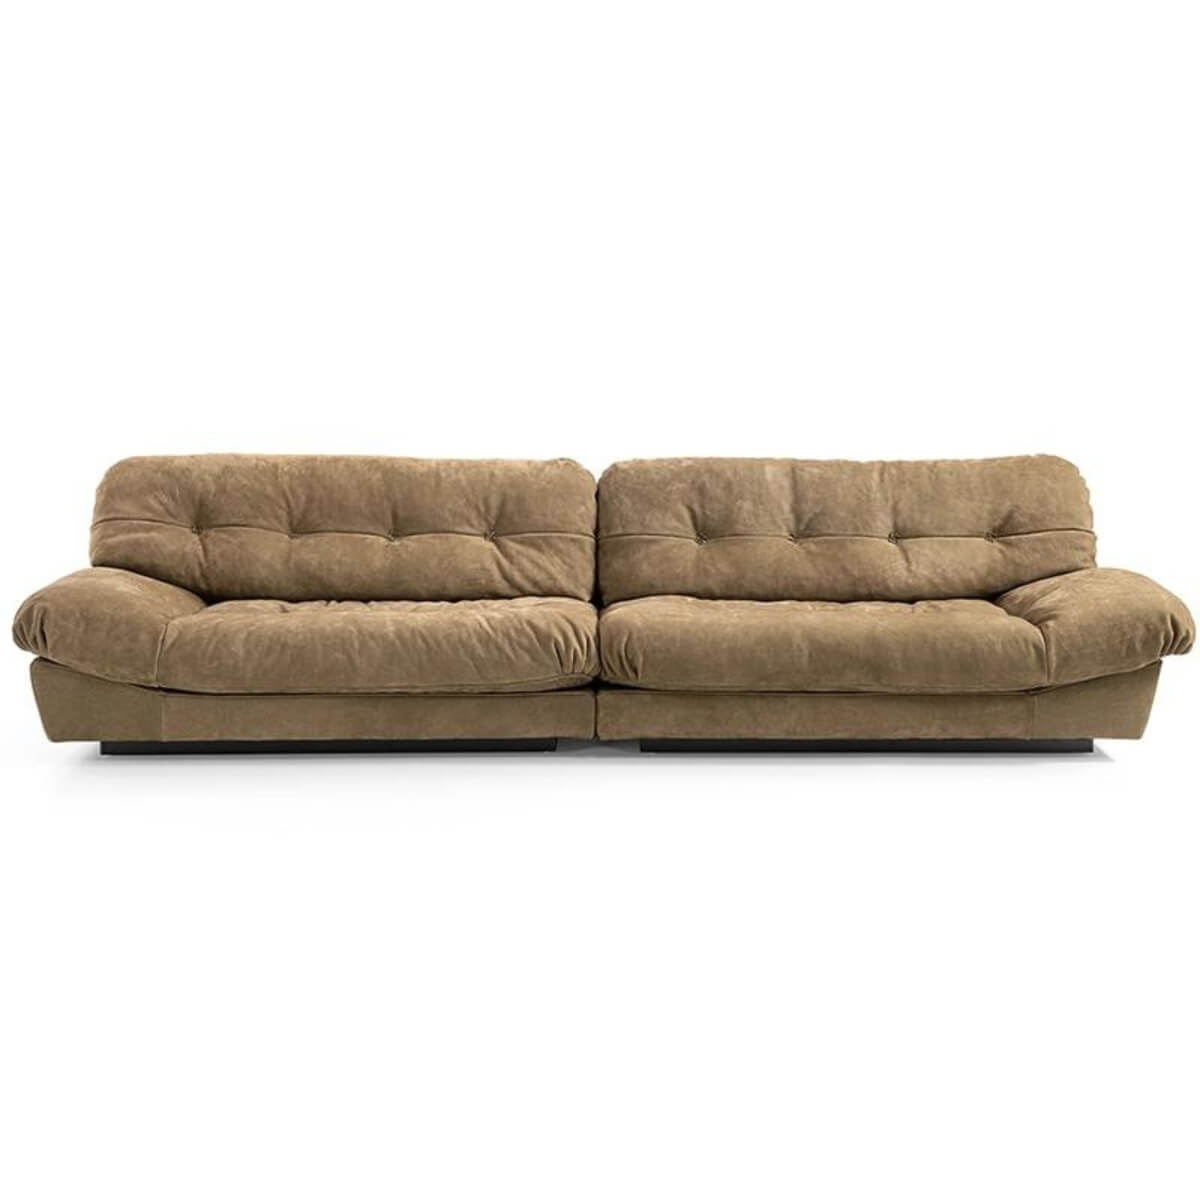 ChromaCraft Matte fabric Sofa - The Perfect Blend of Comfort and Style (Custom made)